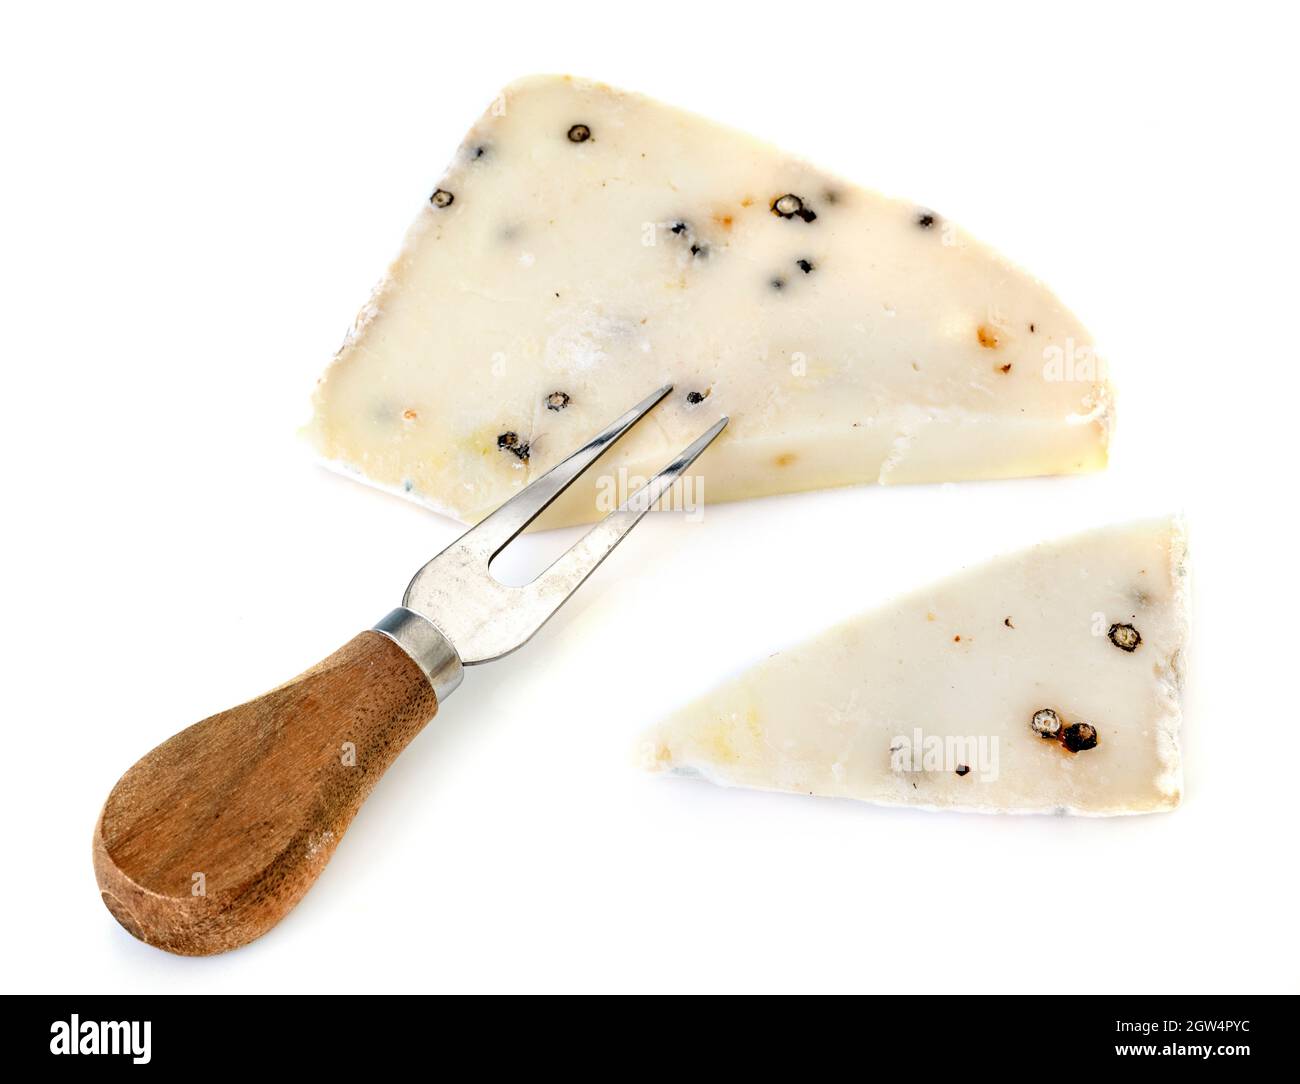 High Angle View Of Cheese Against White Background Stock Photo